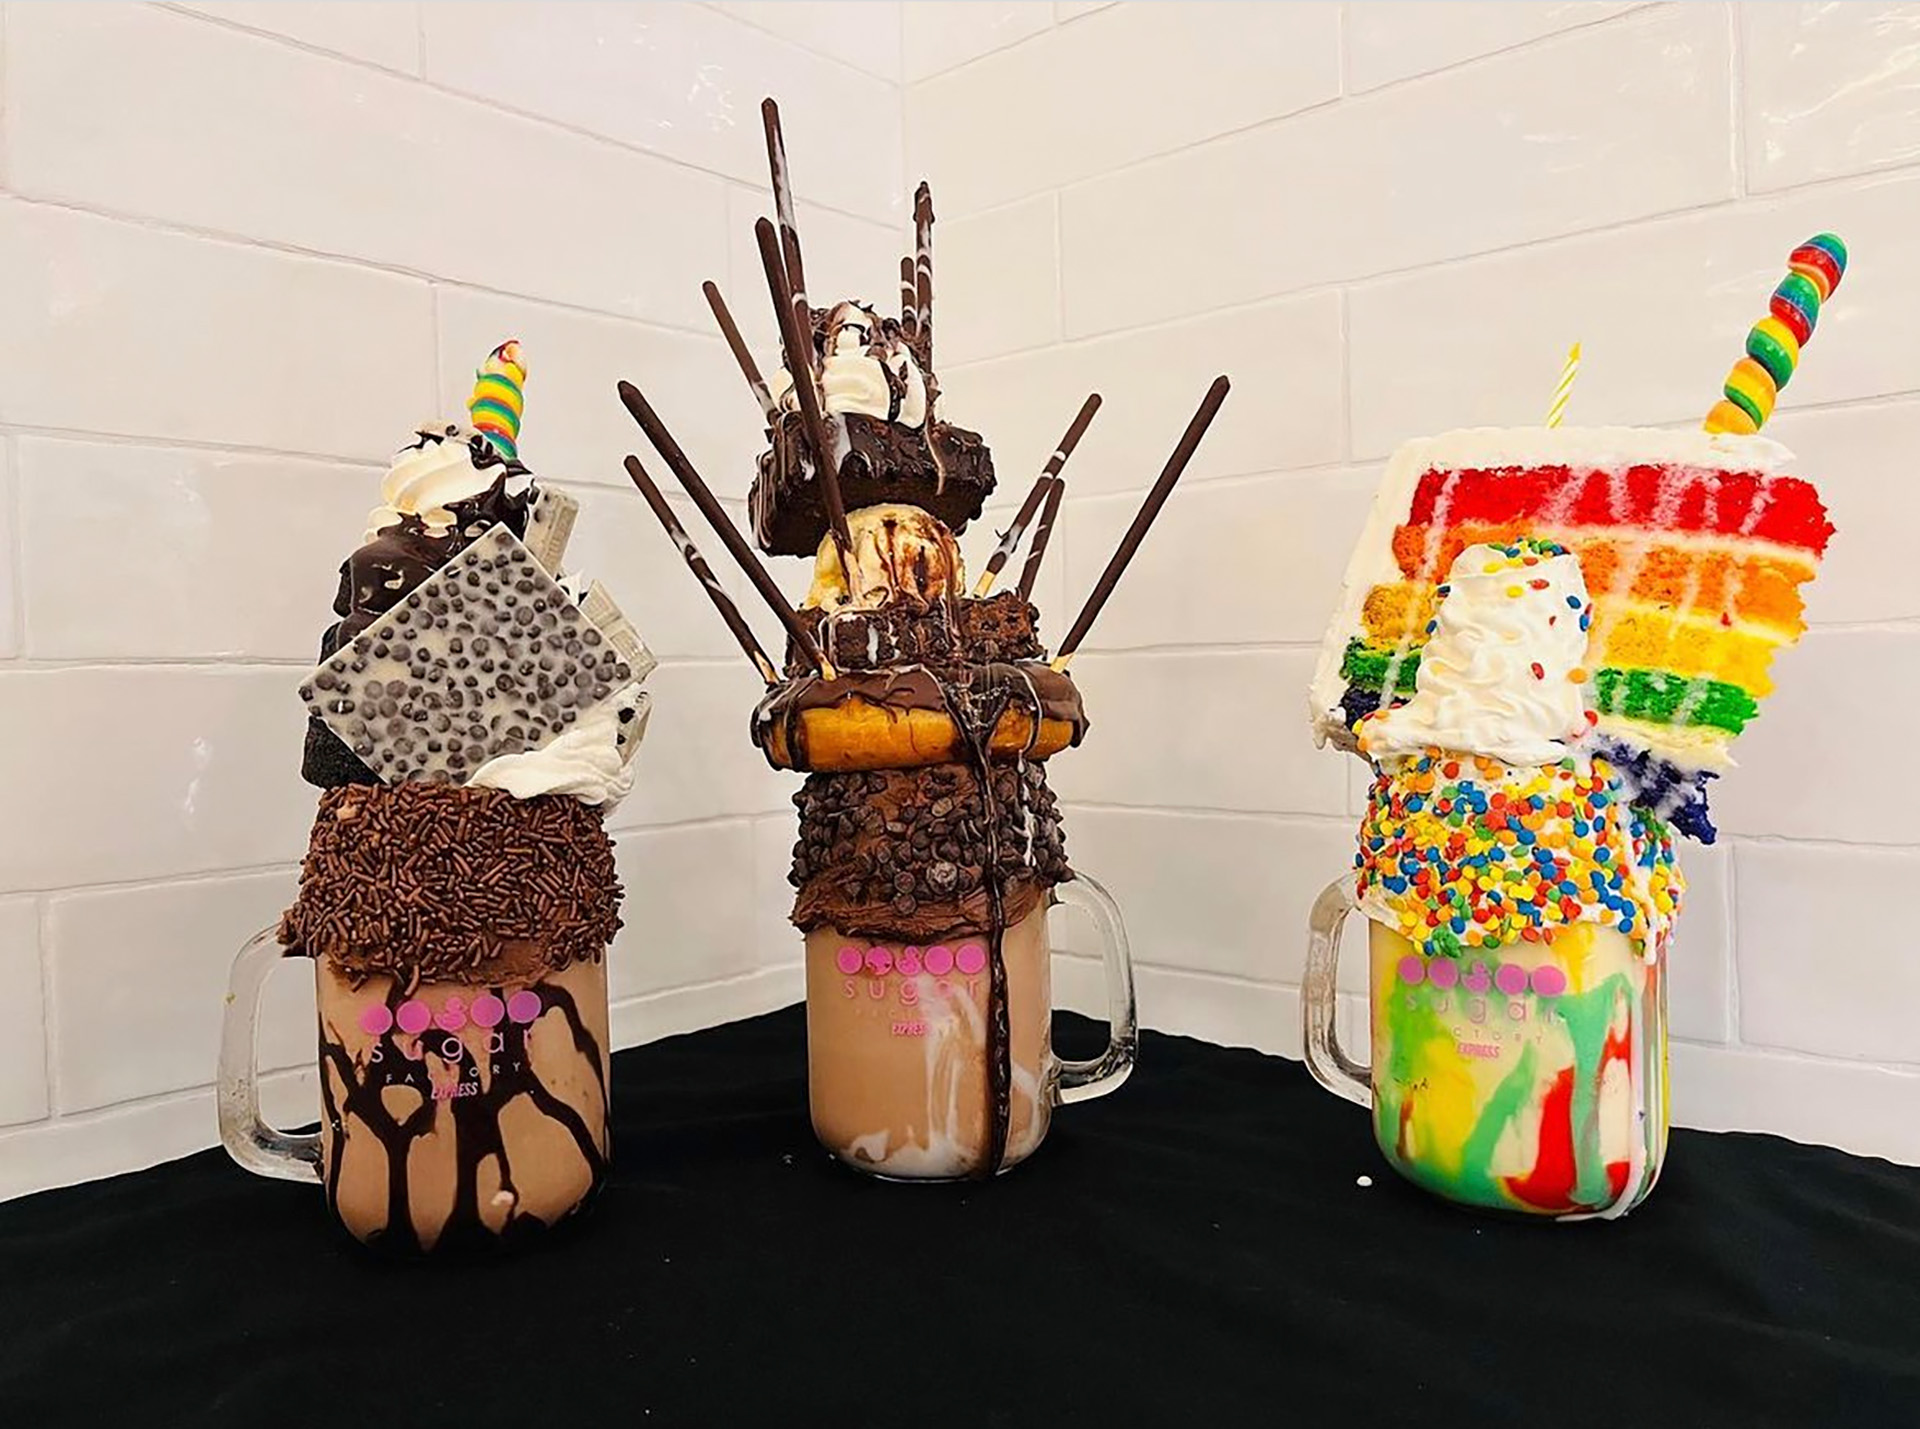 The assembly of the dishes and drinks makes everything in Sugar Factory so "instagrammable"